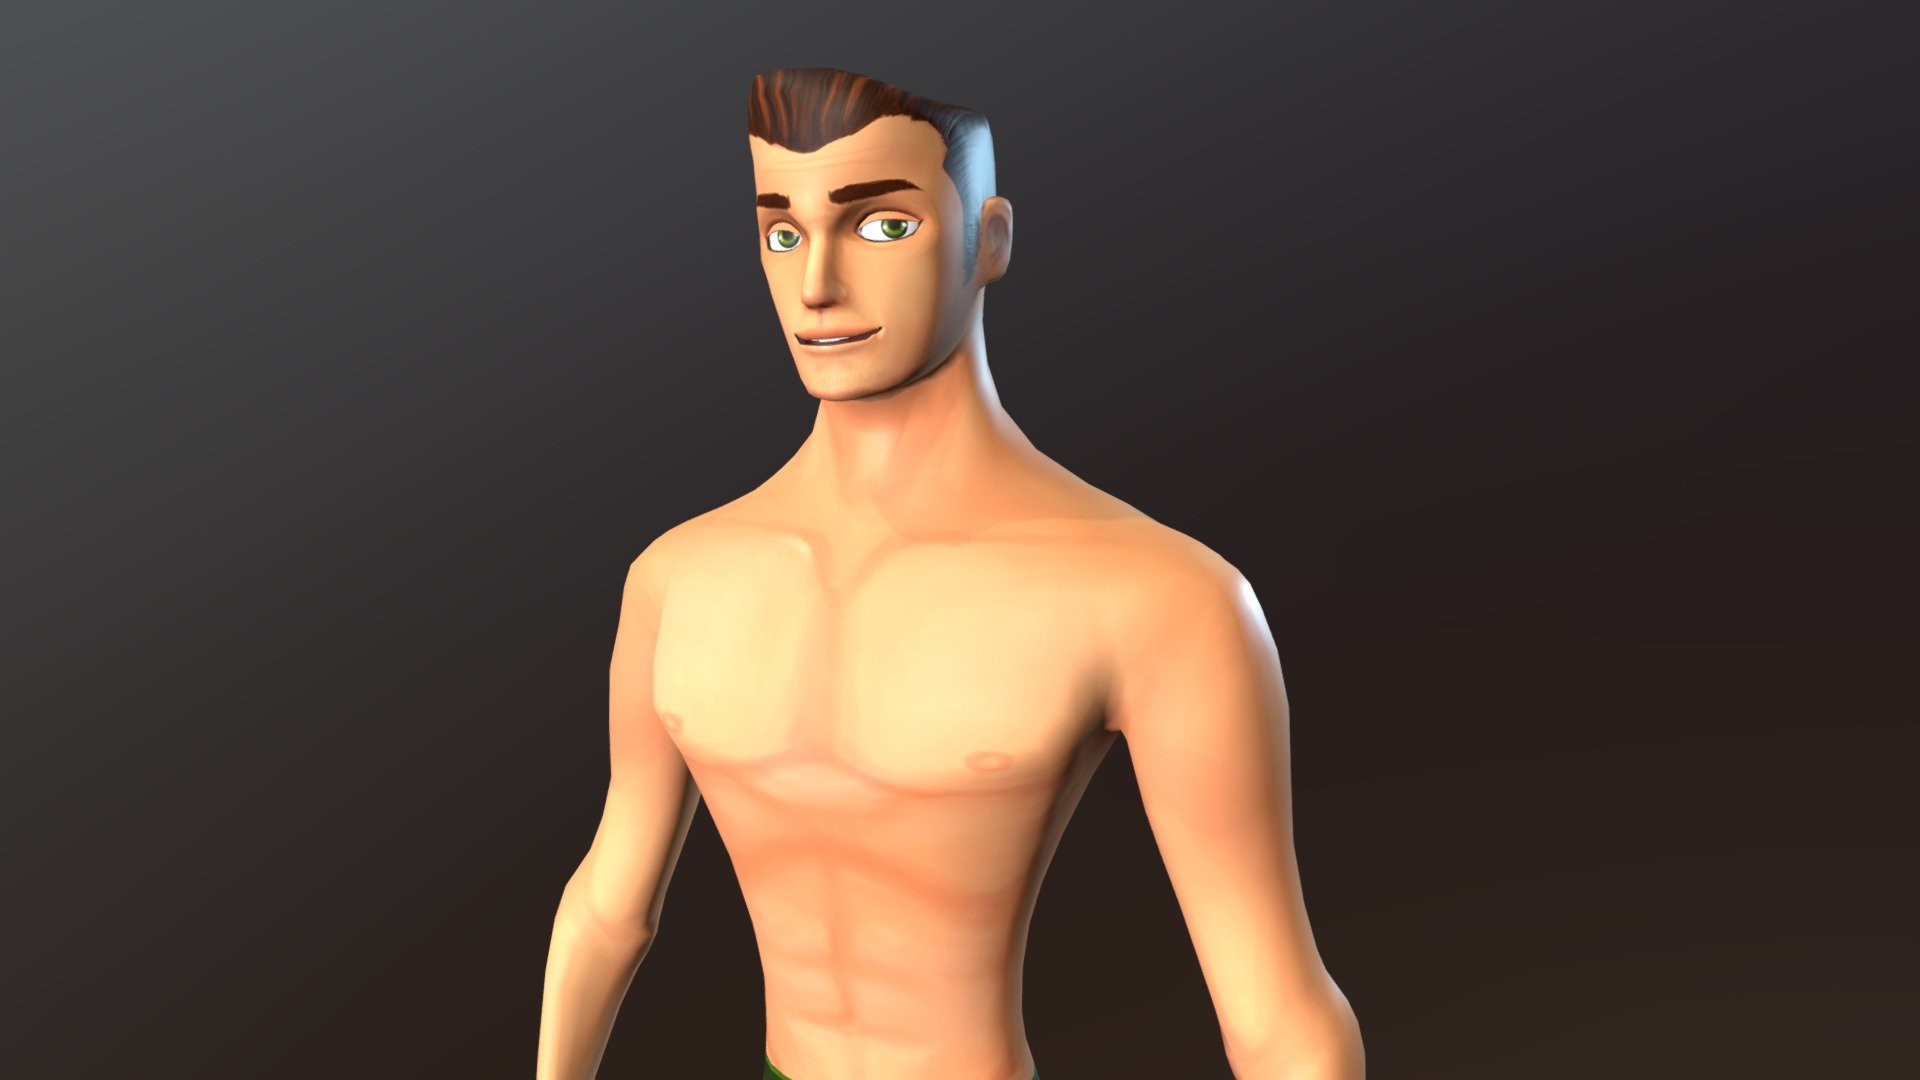 character male cartoon beach low poly - Mike- walk in place - 3D model by maxi.ariani 3d model